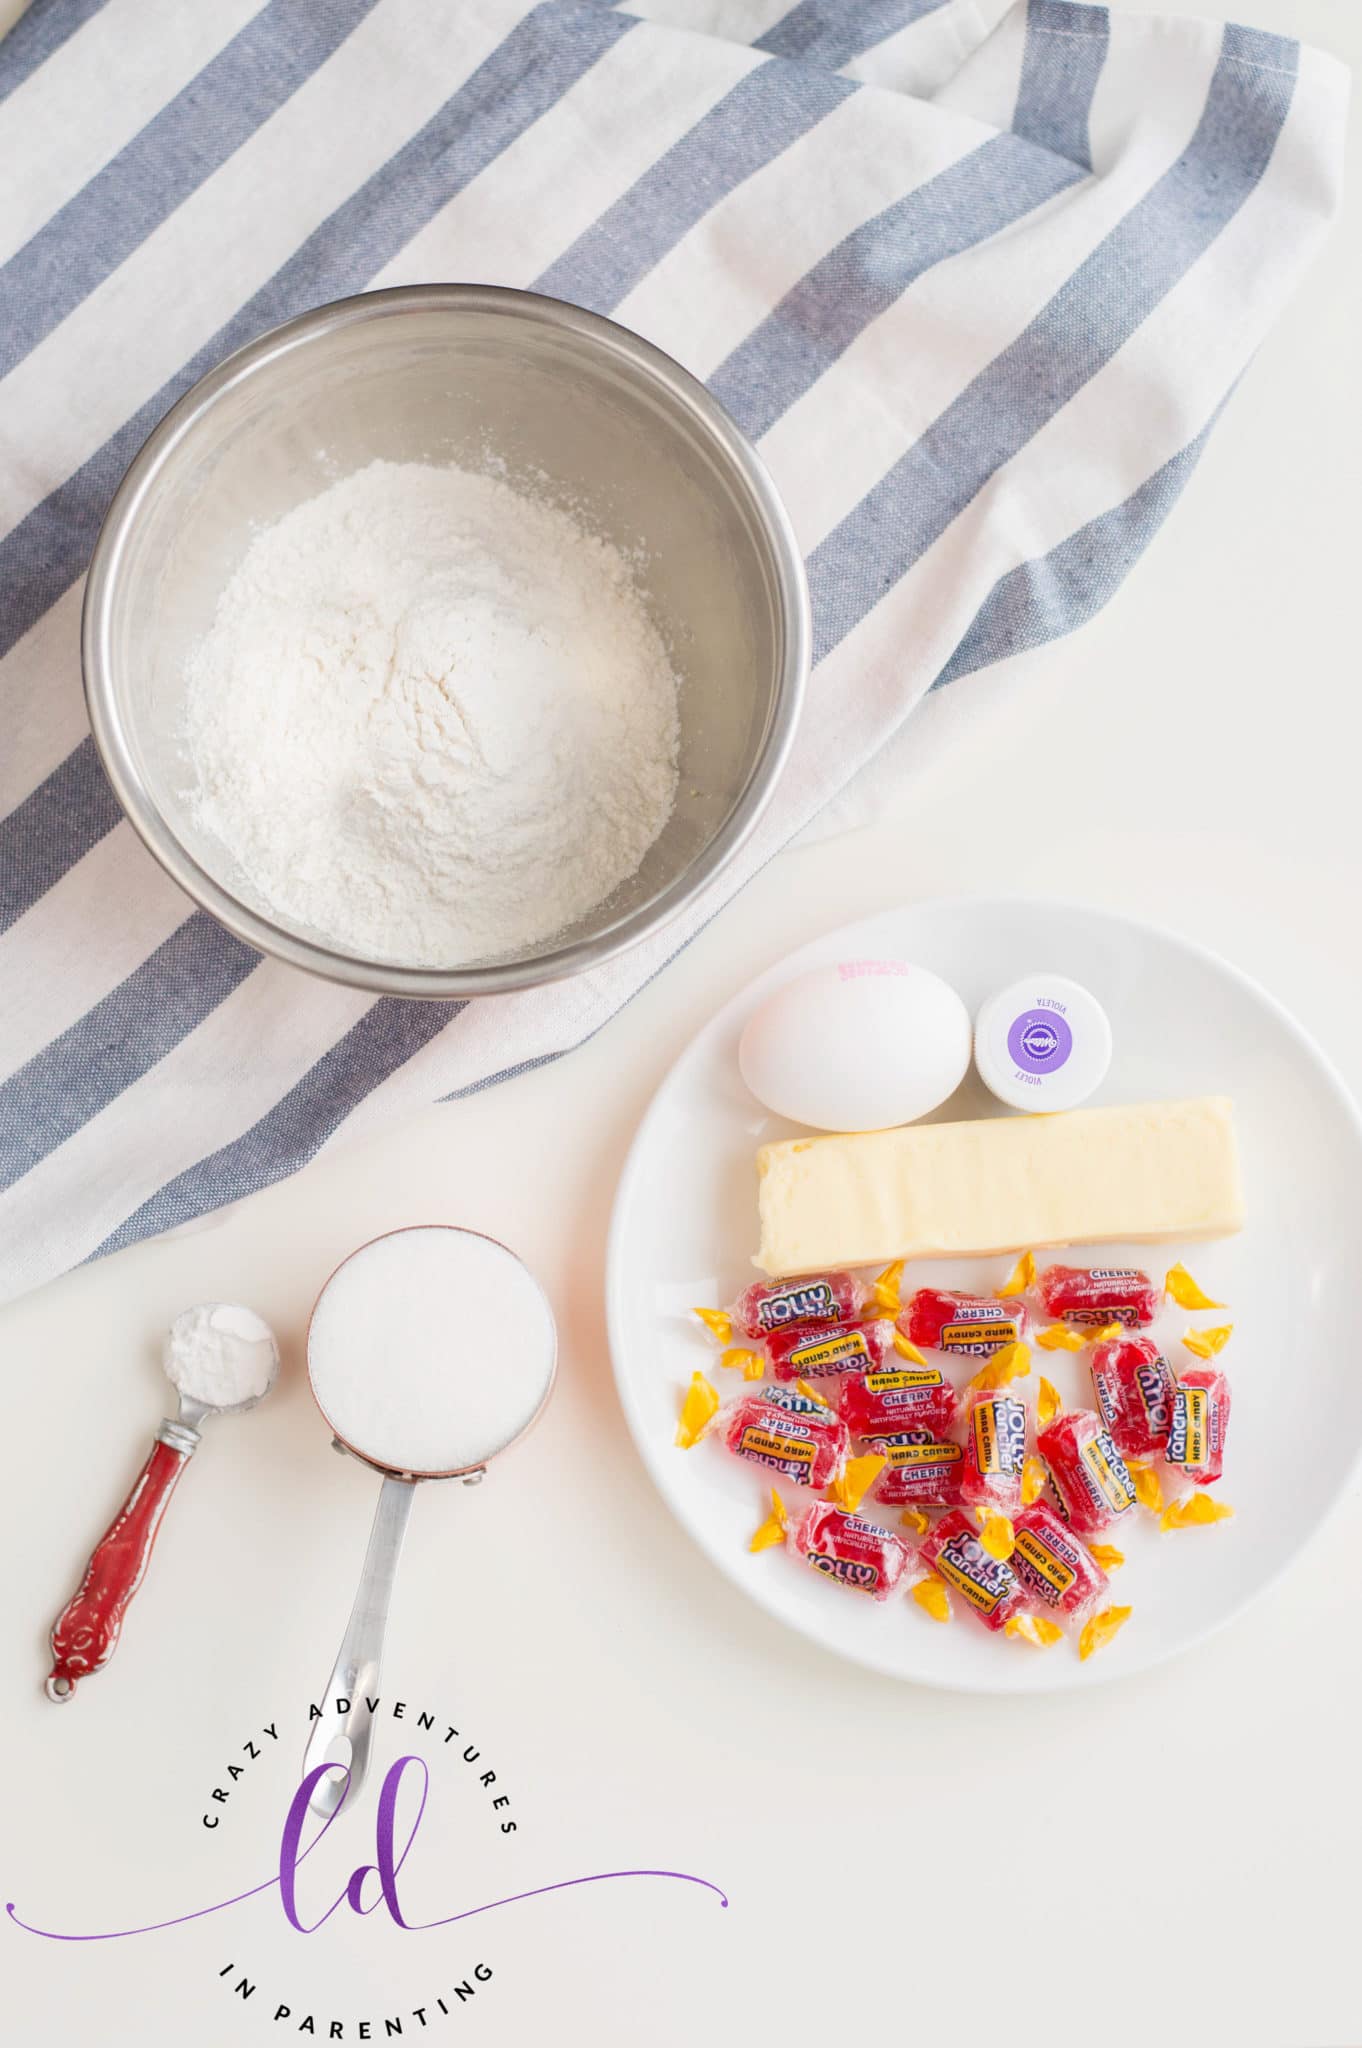 Ingredients to Make Bunny Stained Glass Cookies